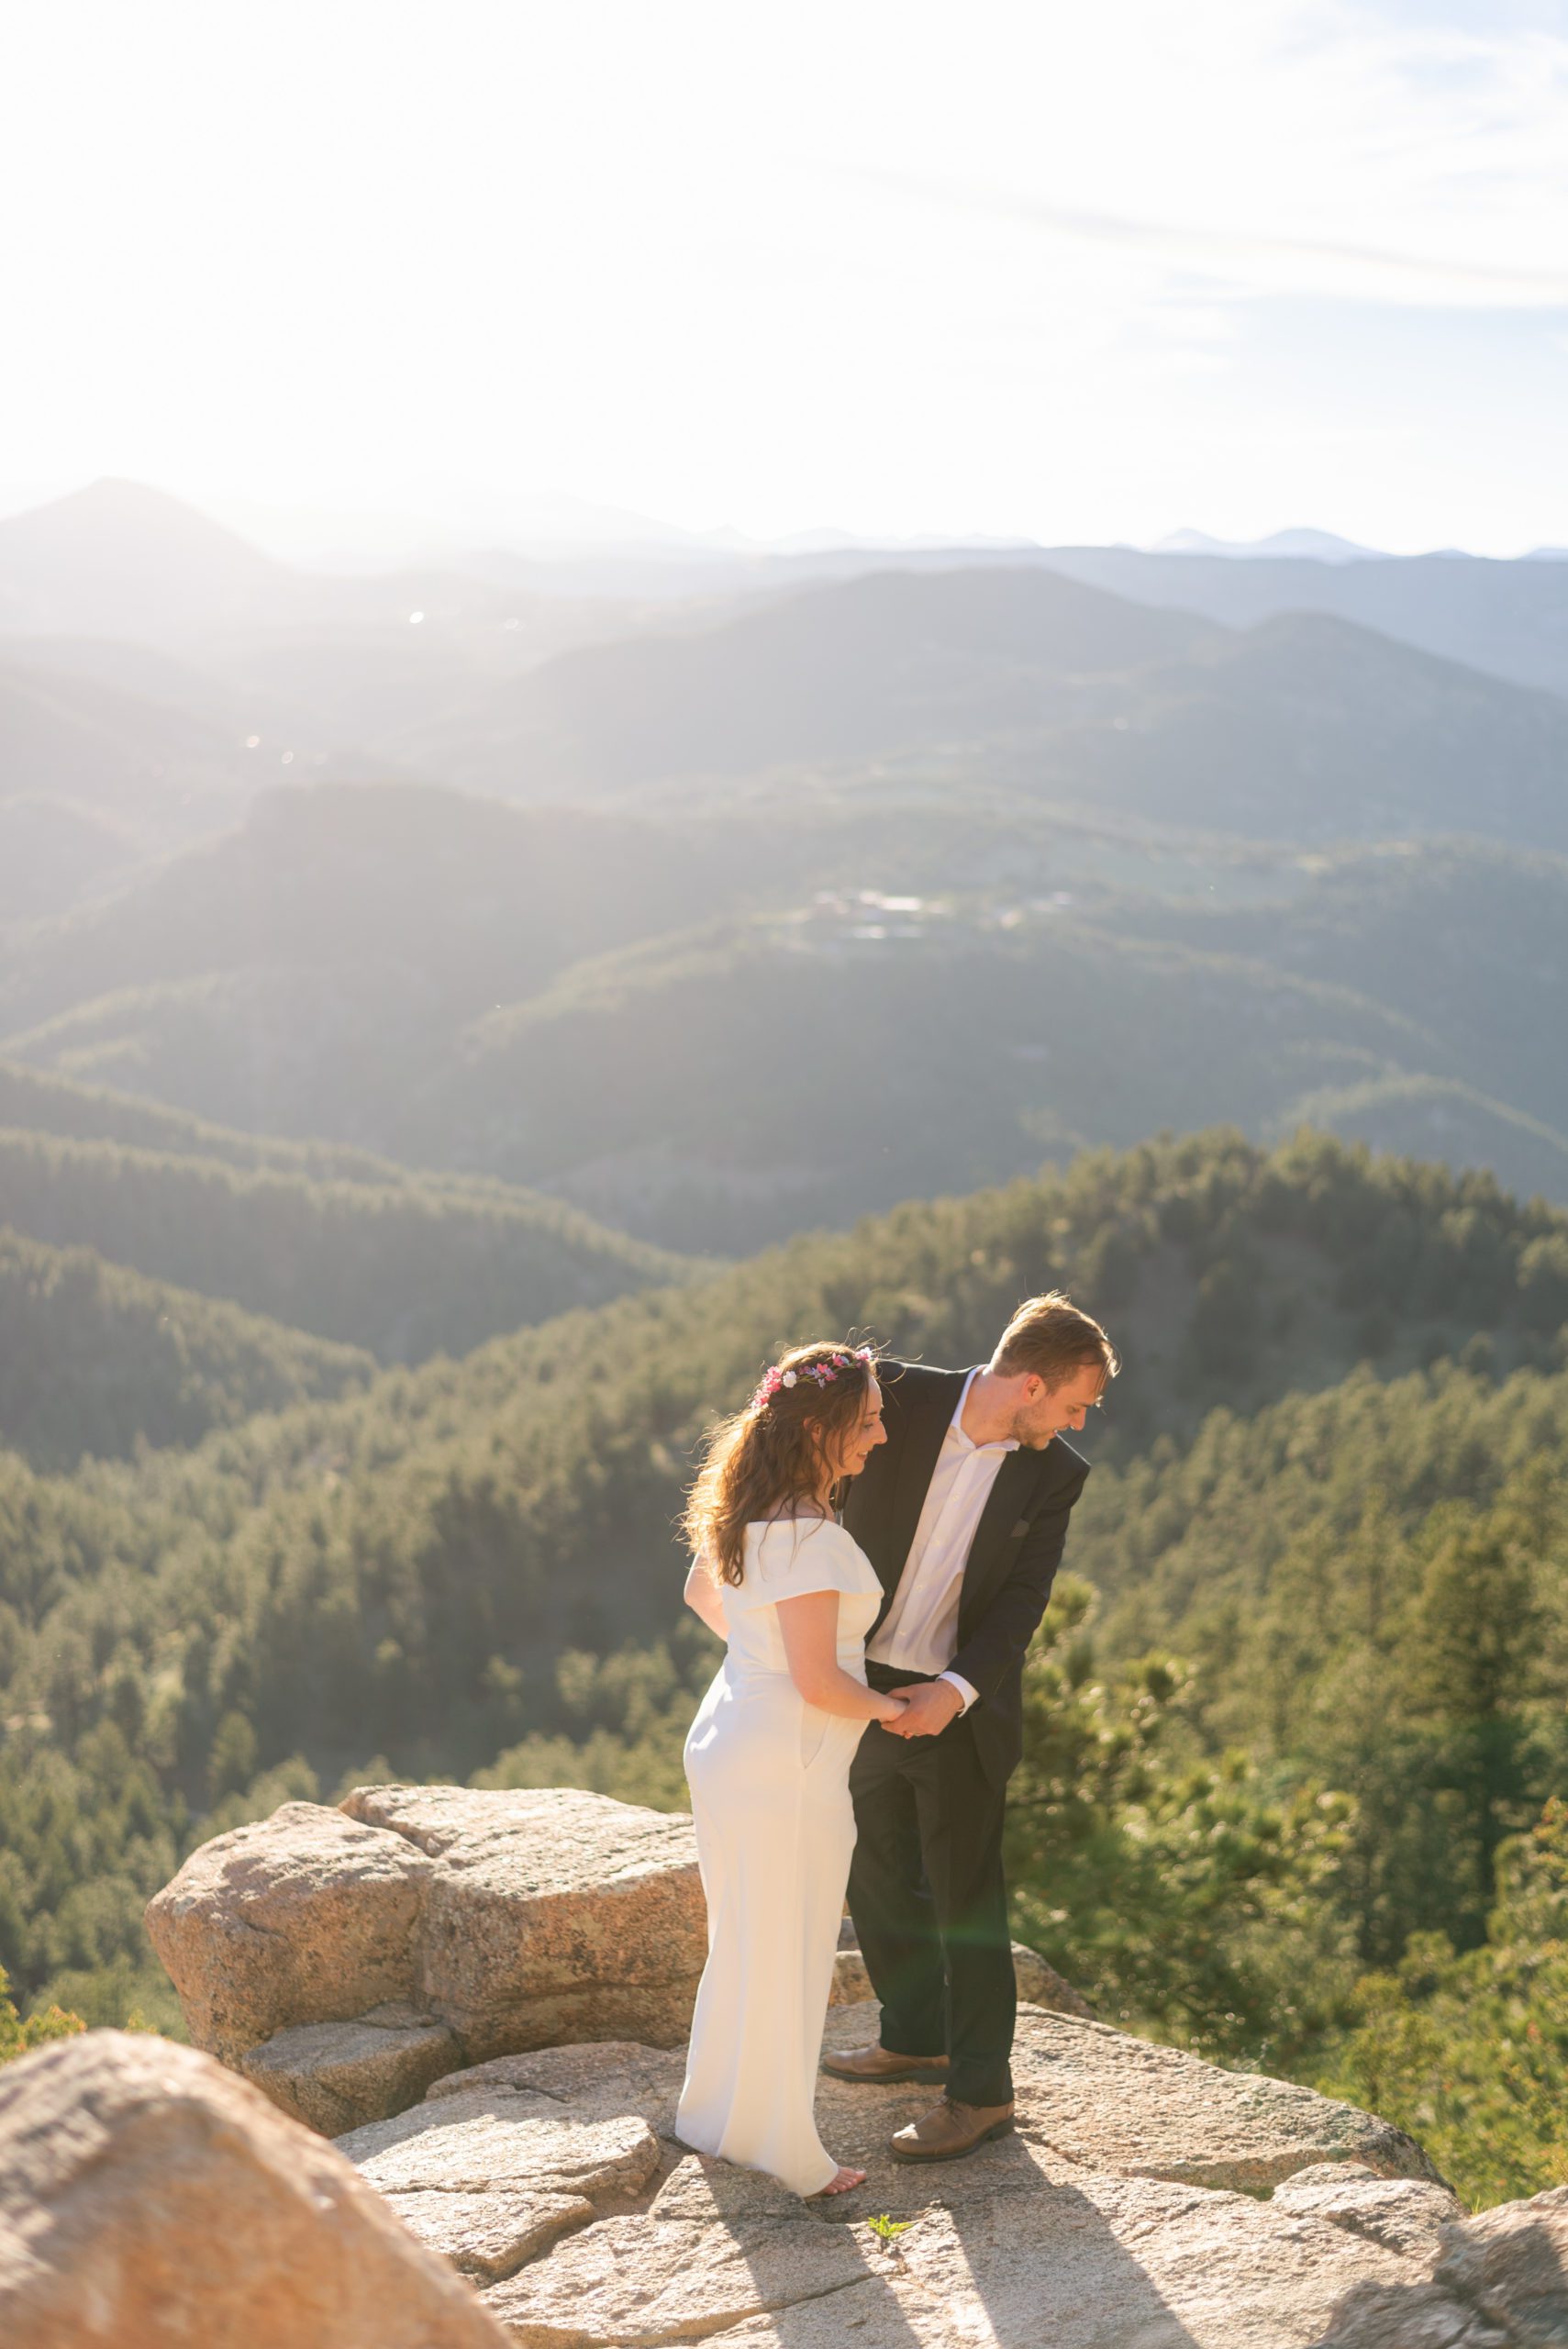 The bride and groom hold hands while looking down below the overlook during their Boulder hiking elopement near realization point.